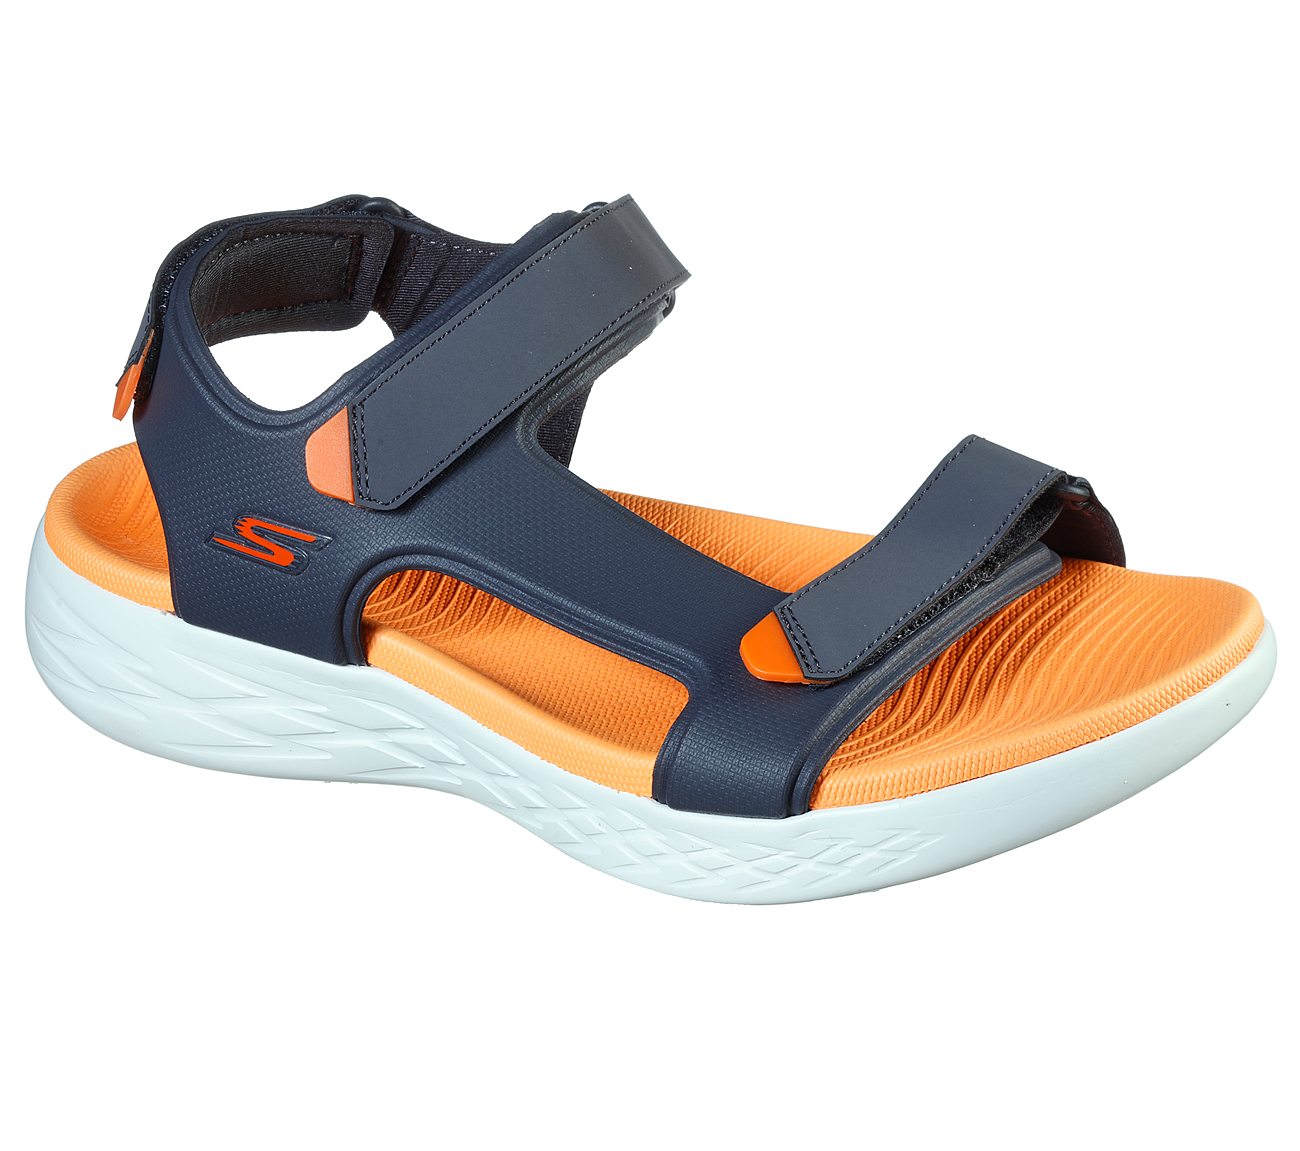 ON-THE-GO 600 - VENTURE, CHARCOAL/ORANGE Footwear Lateral View